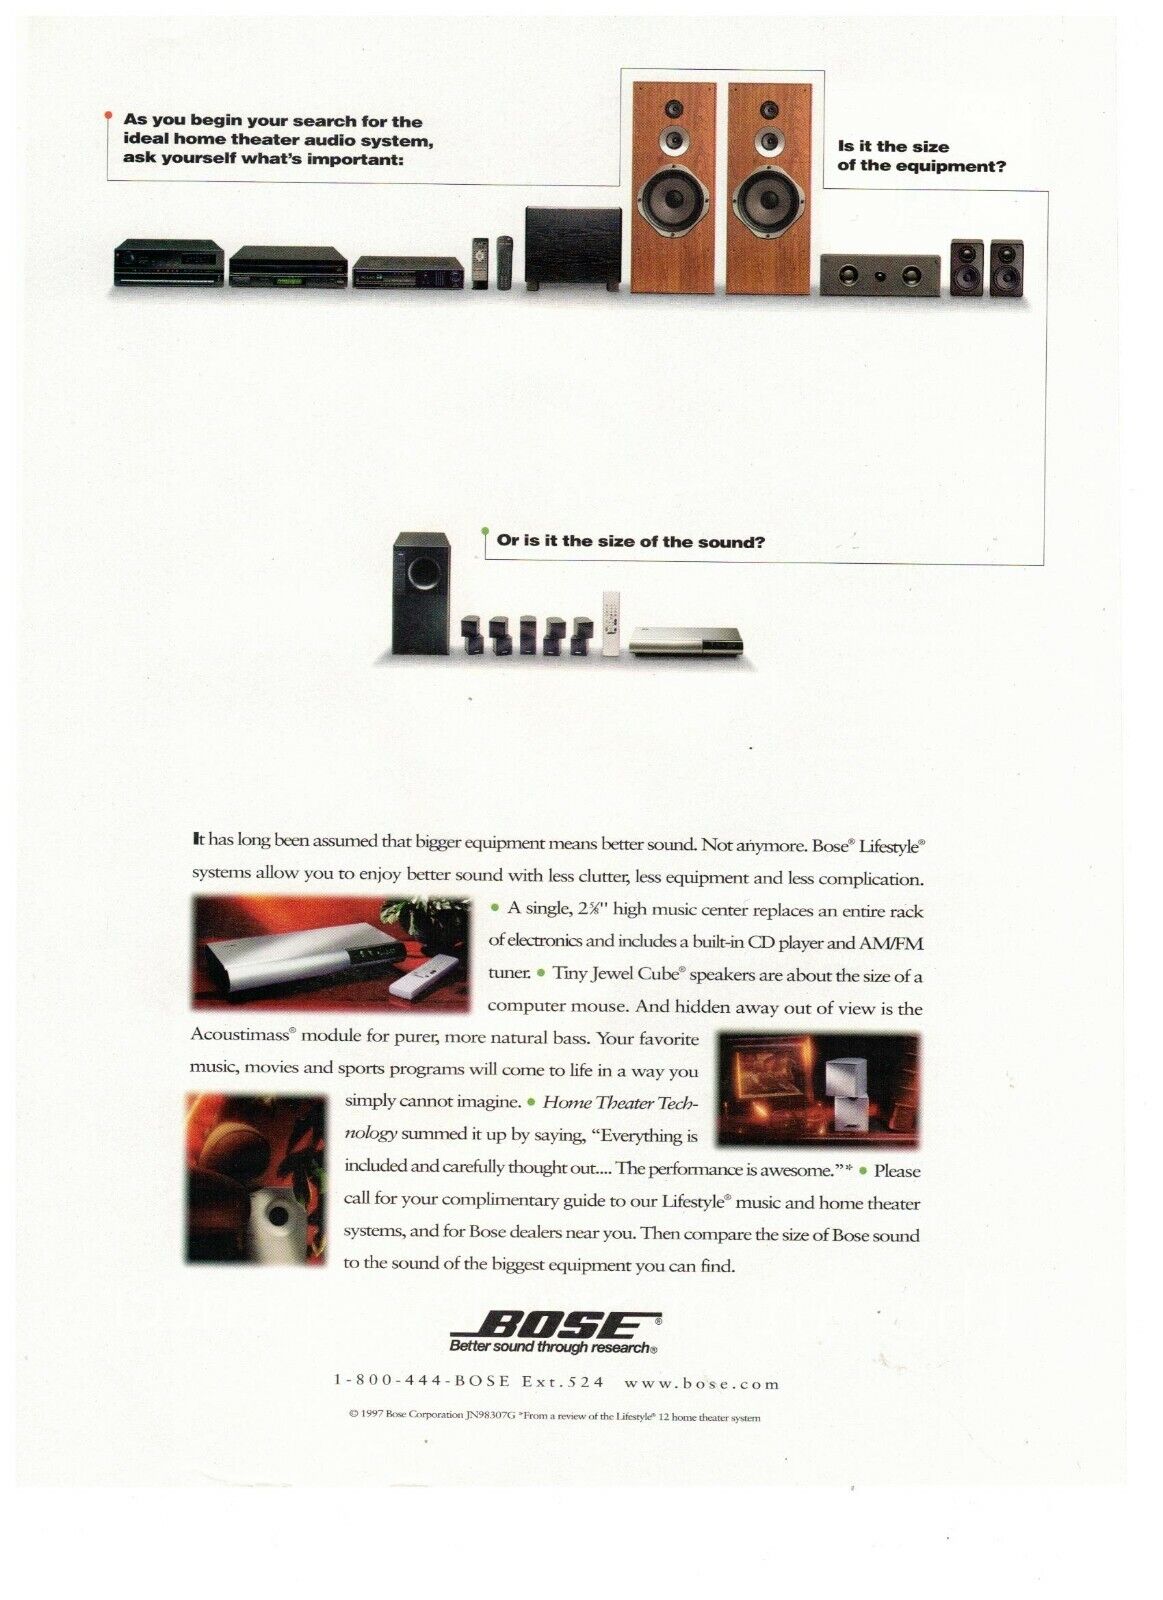 1997 Bose Size of the Sound Lifestyle System Vintage Print Advertisement